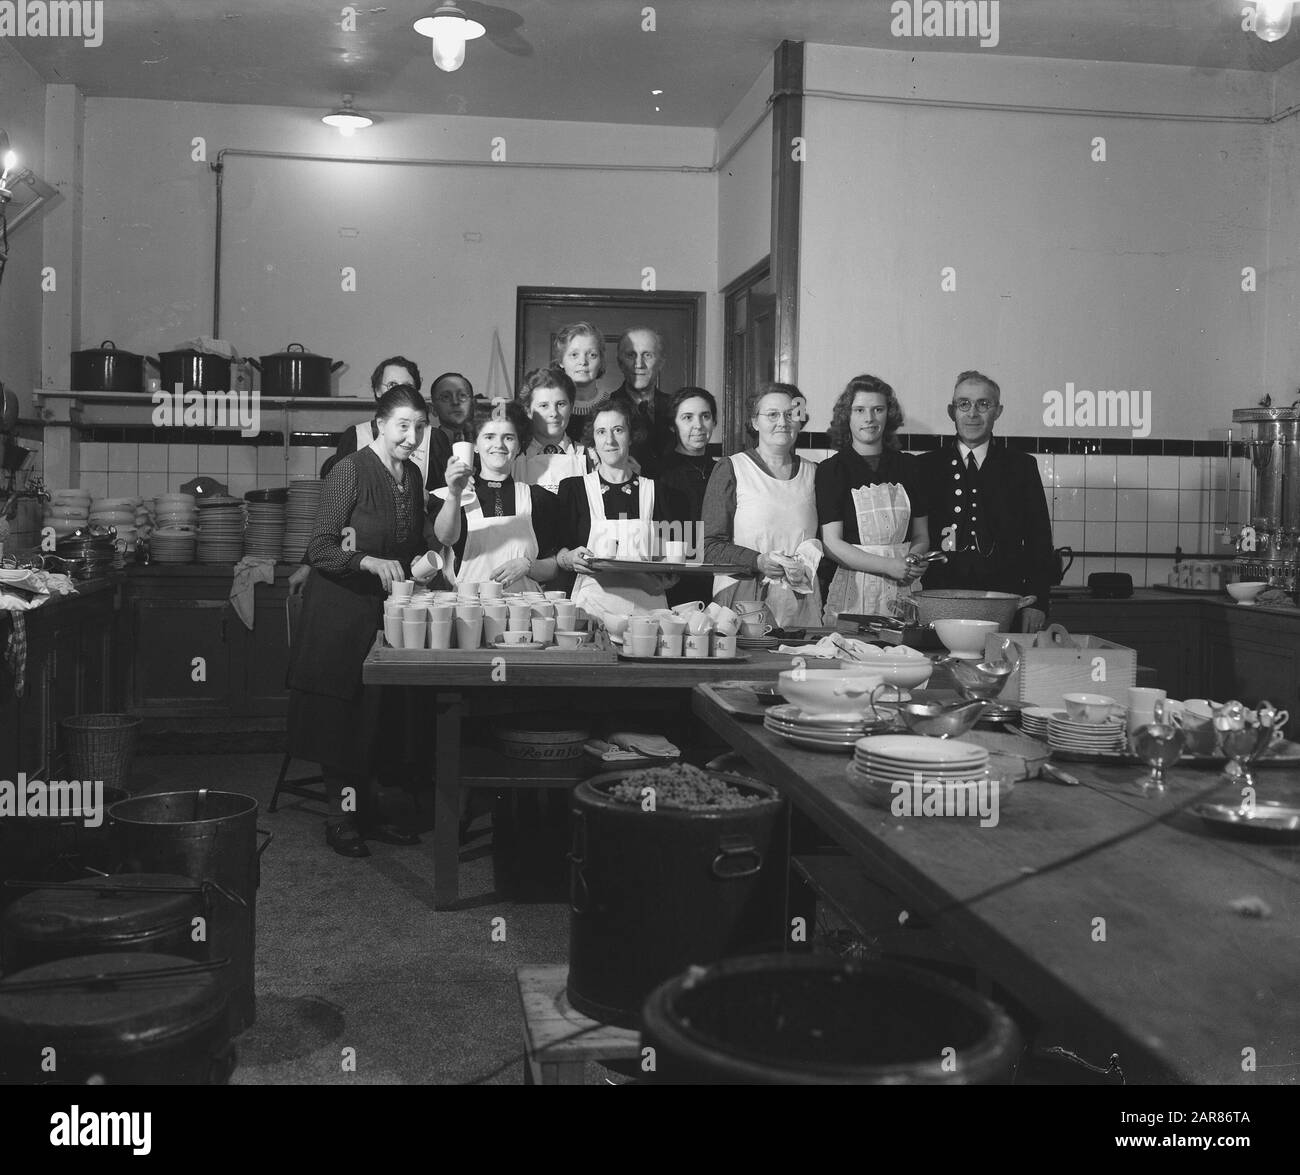 On the occasion of the reception of 120 French students in our country after arrival a simple dinner offered by the municipality of Amsterdam in the City Hall. The kitchen staff poses with Mr. P.J. Mijksenaar, chief of the Municipal Press and Propaganda Service Date: 22 March 1946 Location: Amsterdam Keywords: group portraits, kitchens, employees Personal name: Mijksenaar, P.J. Stock Photo